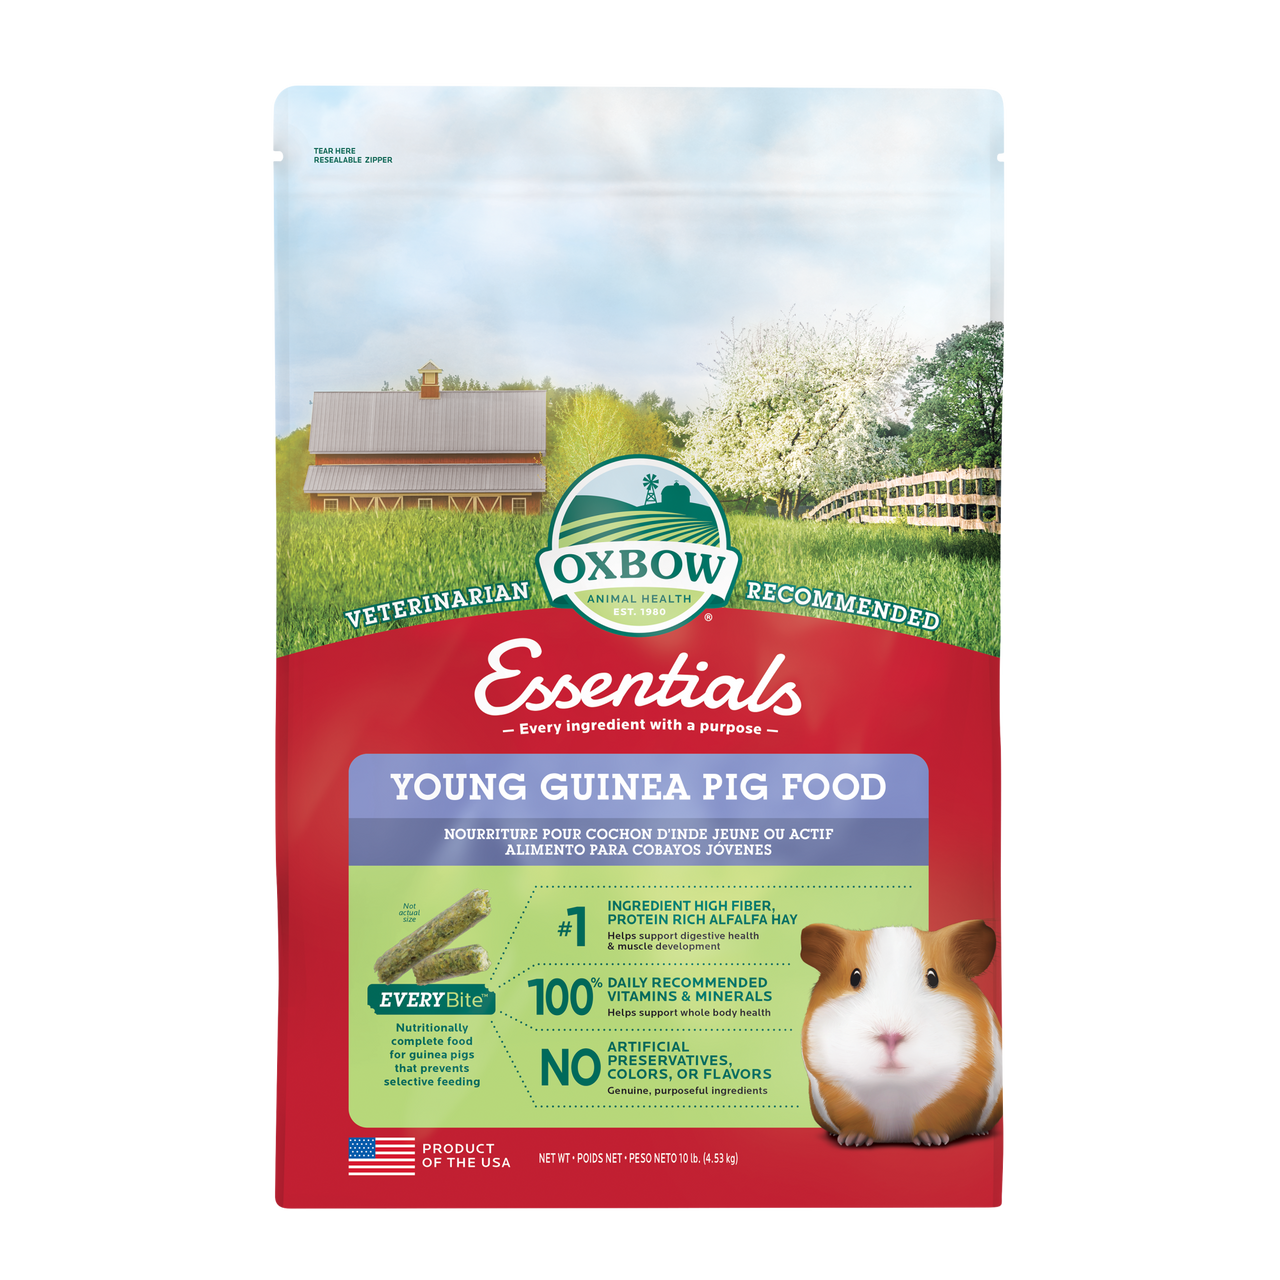 Oxbow Animal Health Essentials Young Guinea Pig Food 10lb